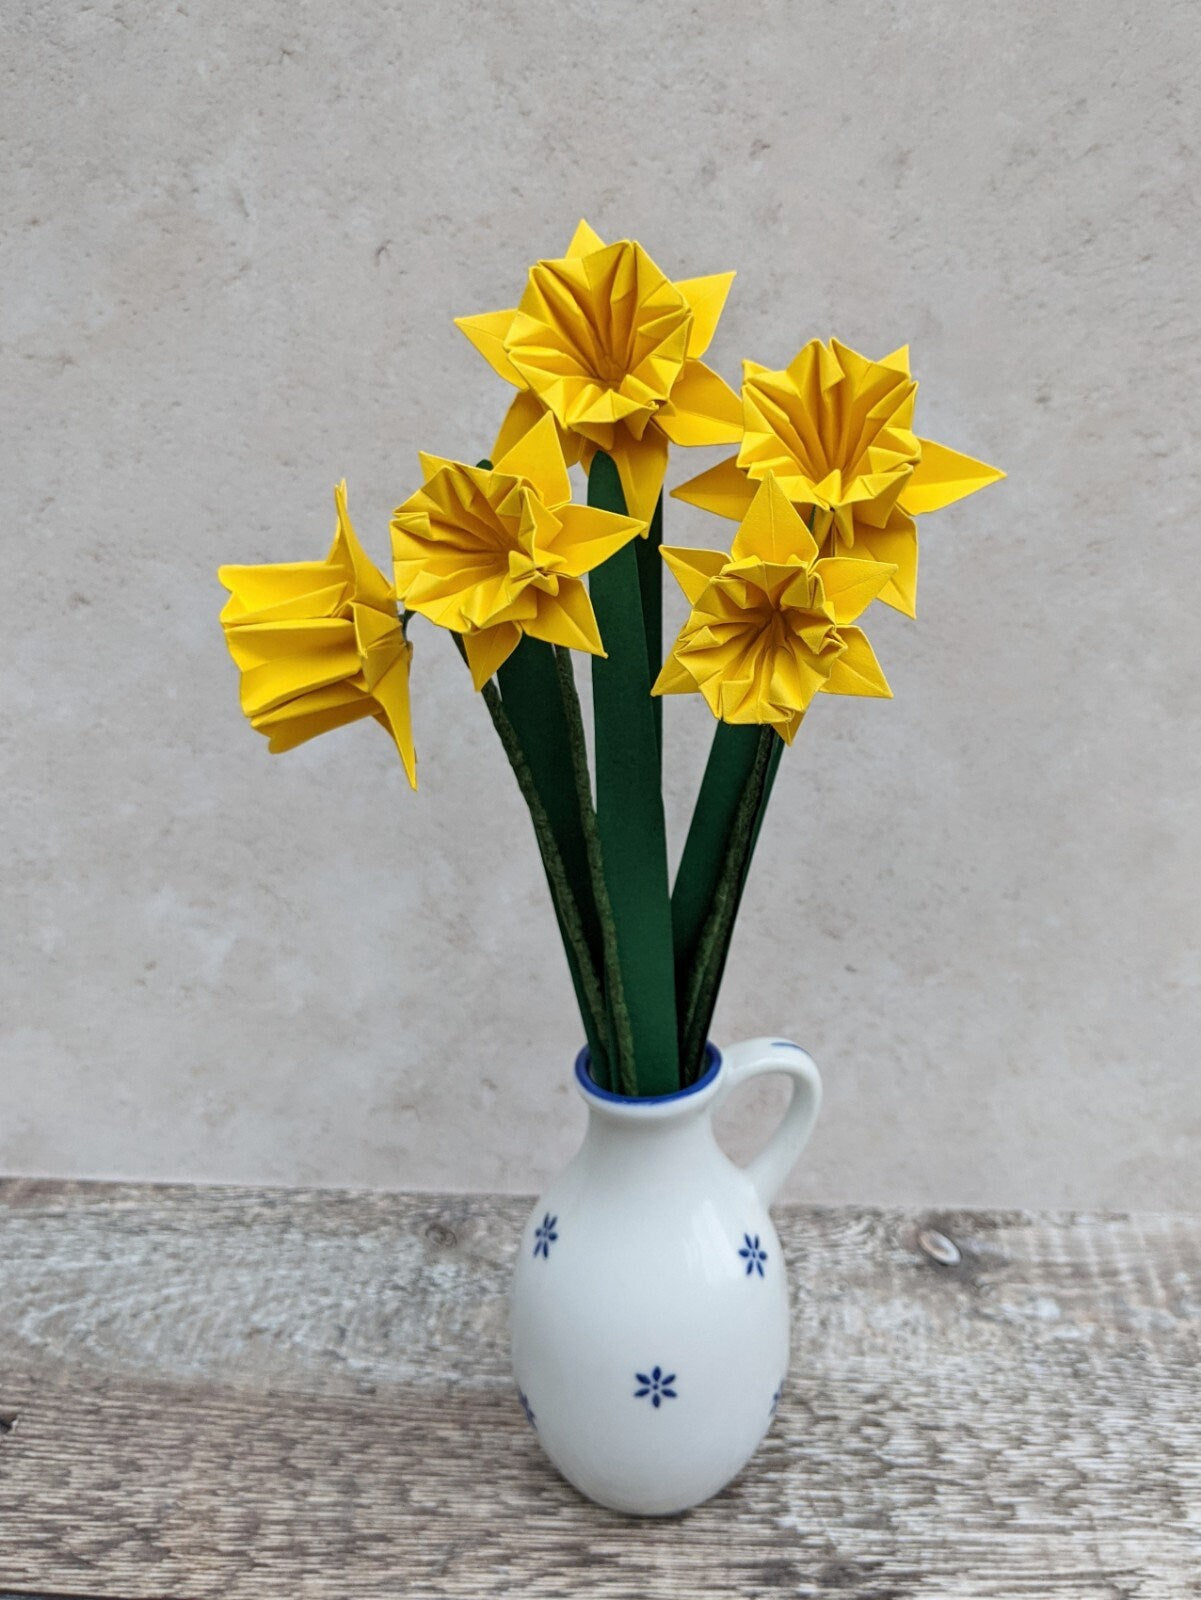 Spring daffodils bouquet, five origami narcissus flowers